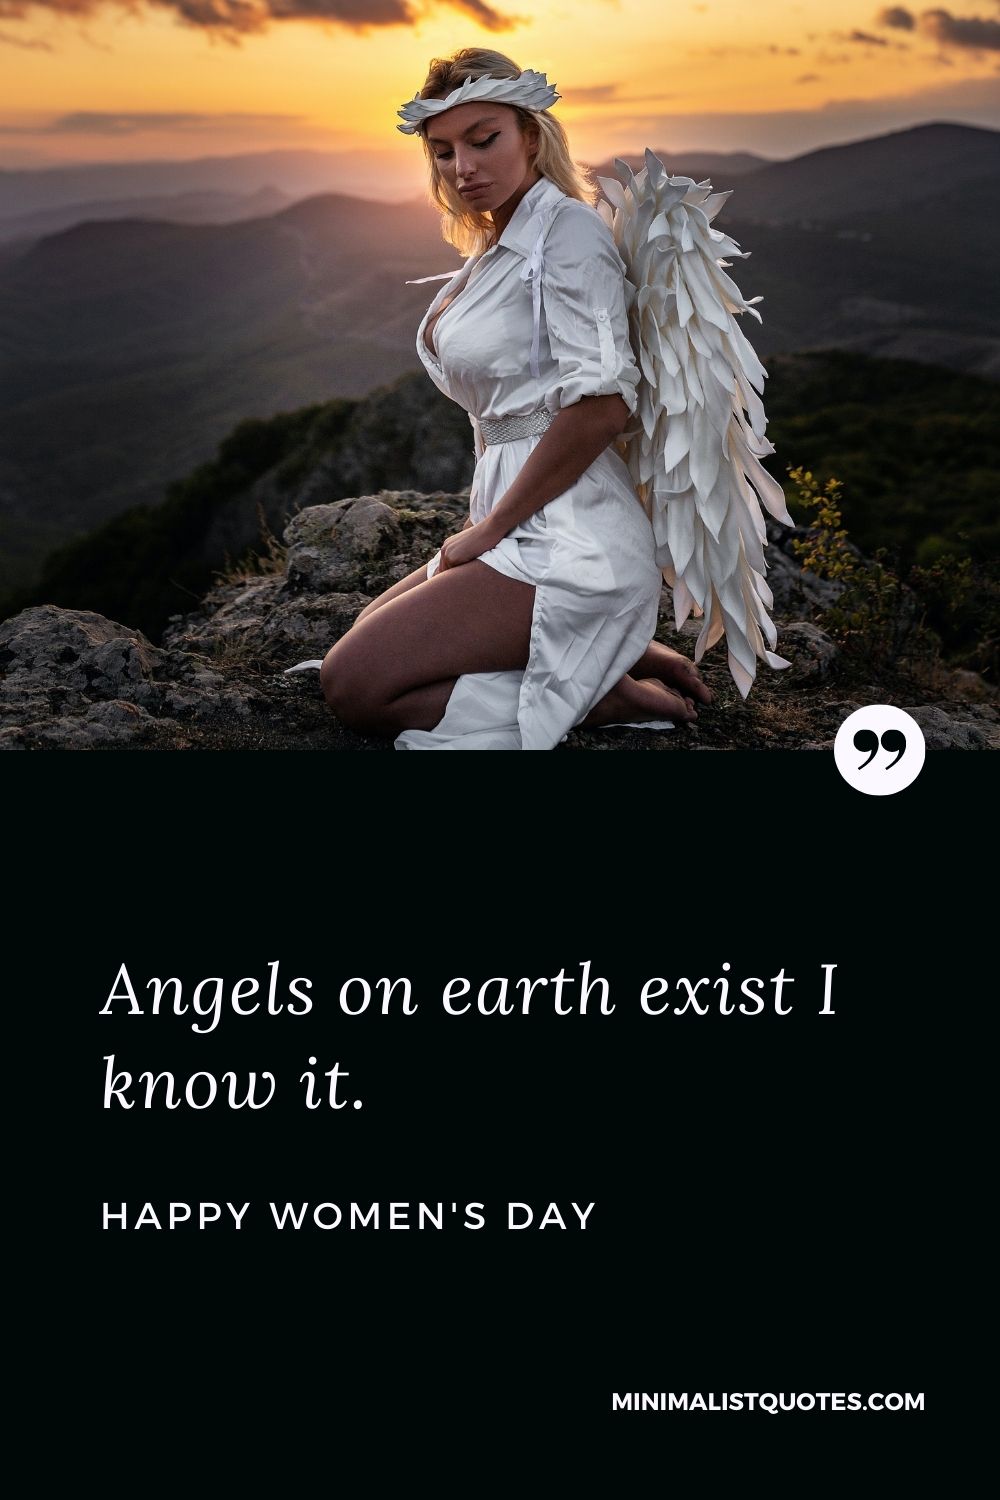 Angels on earth exist I know it. Happy Women's Day!